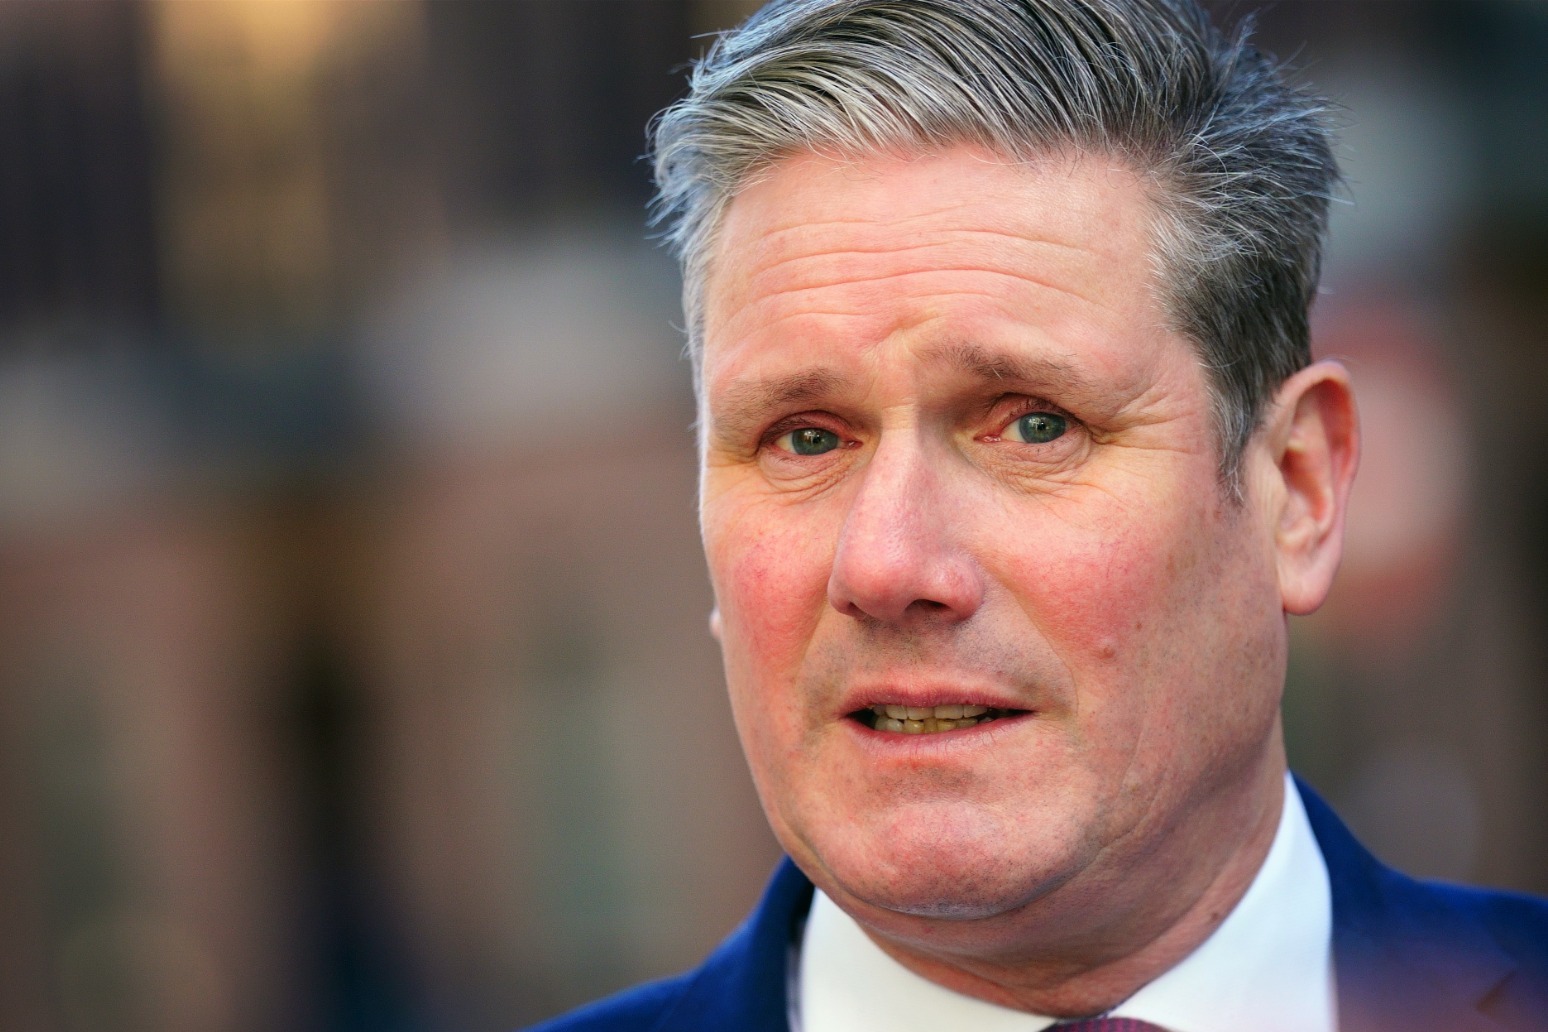 PM resists calls to apologise for Savile slur after Starmer rescued from mob 